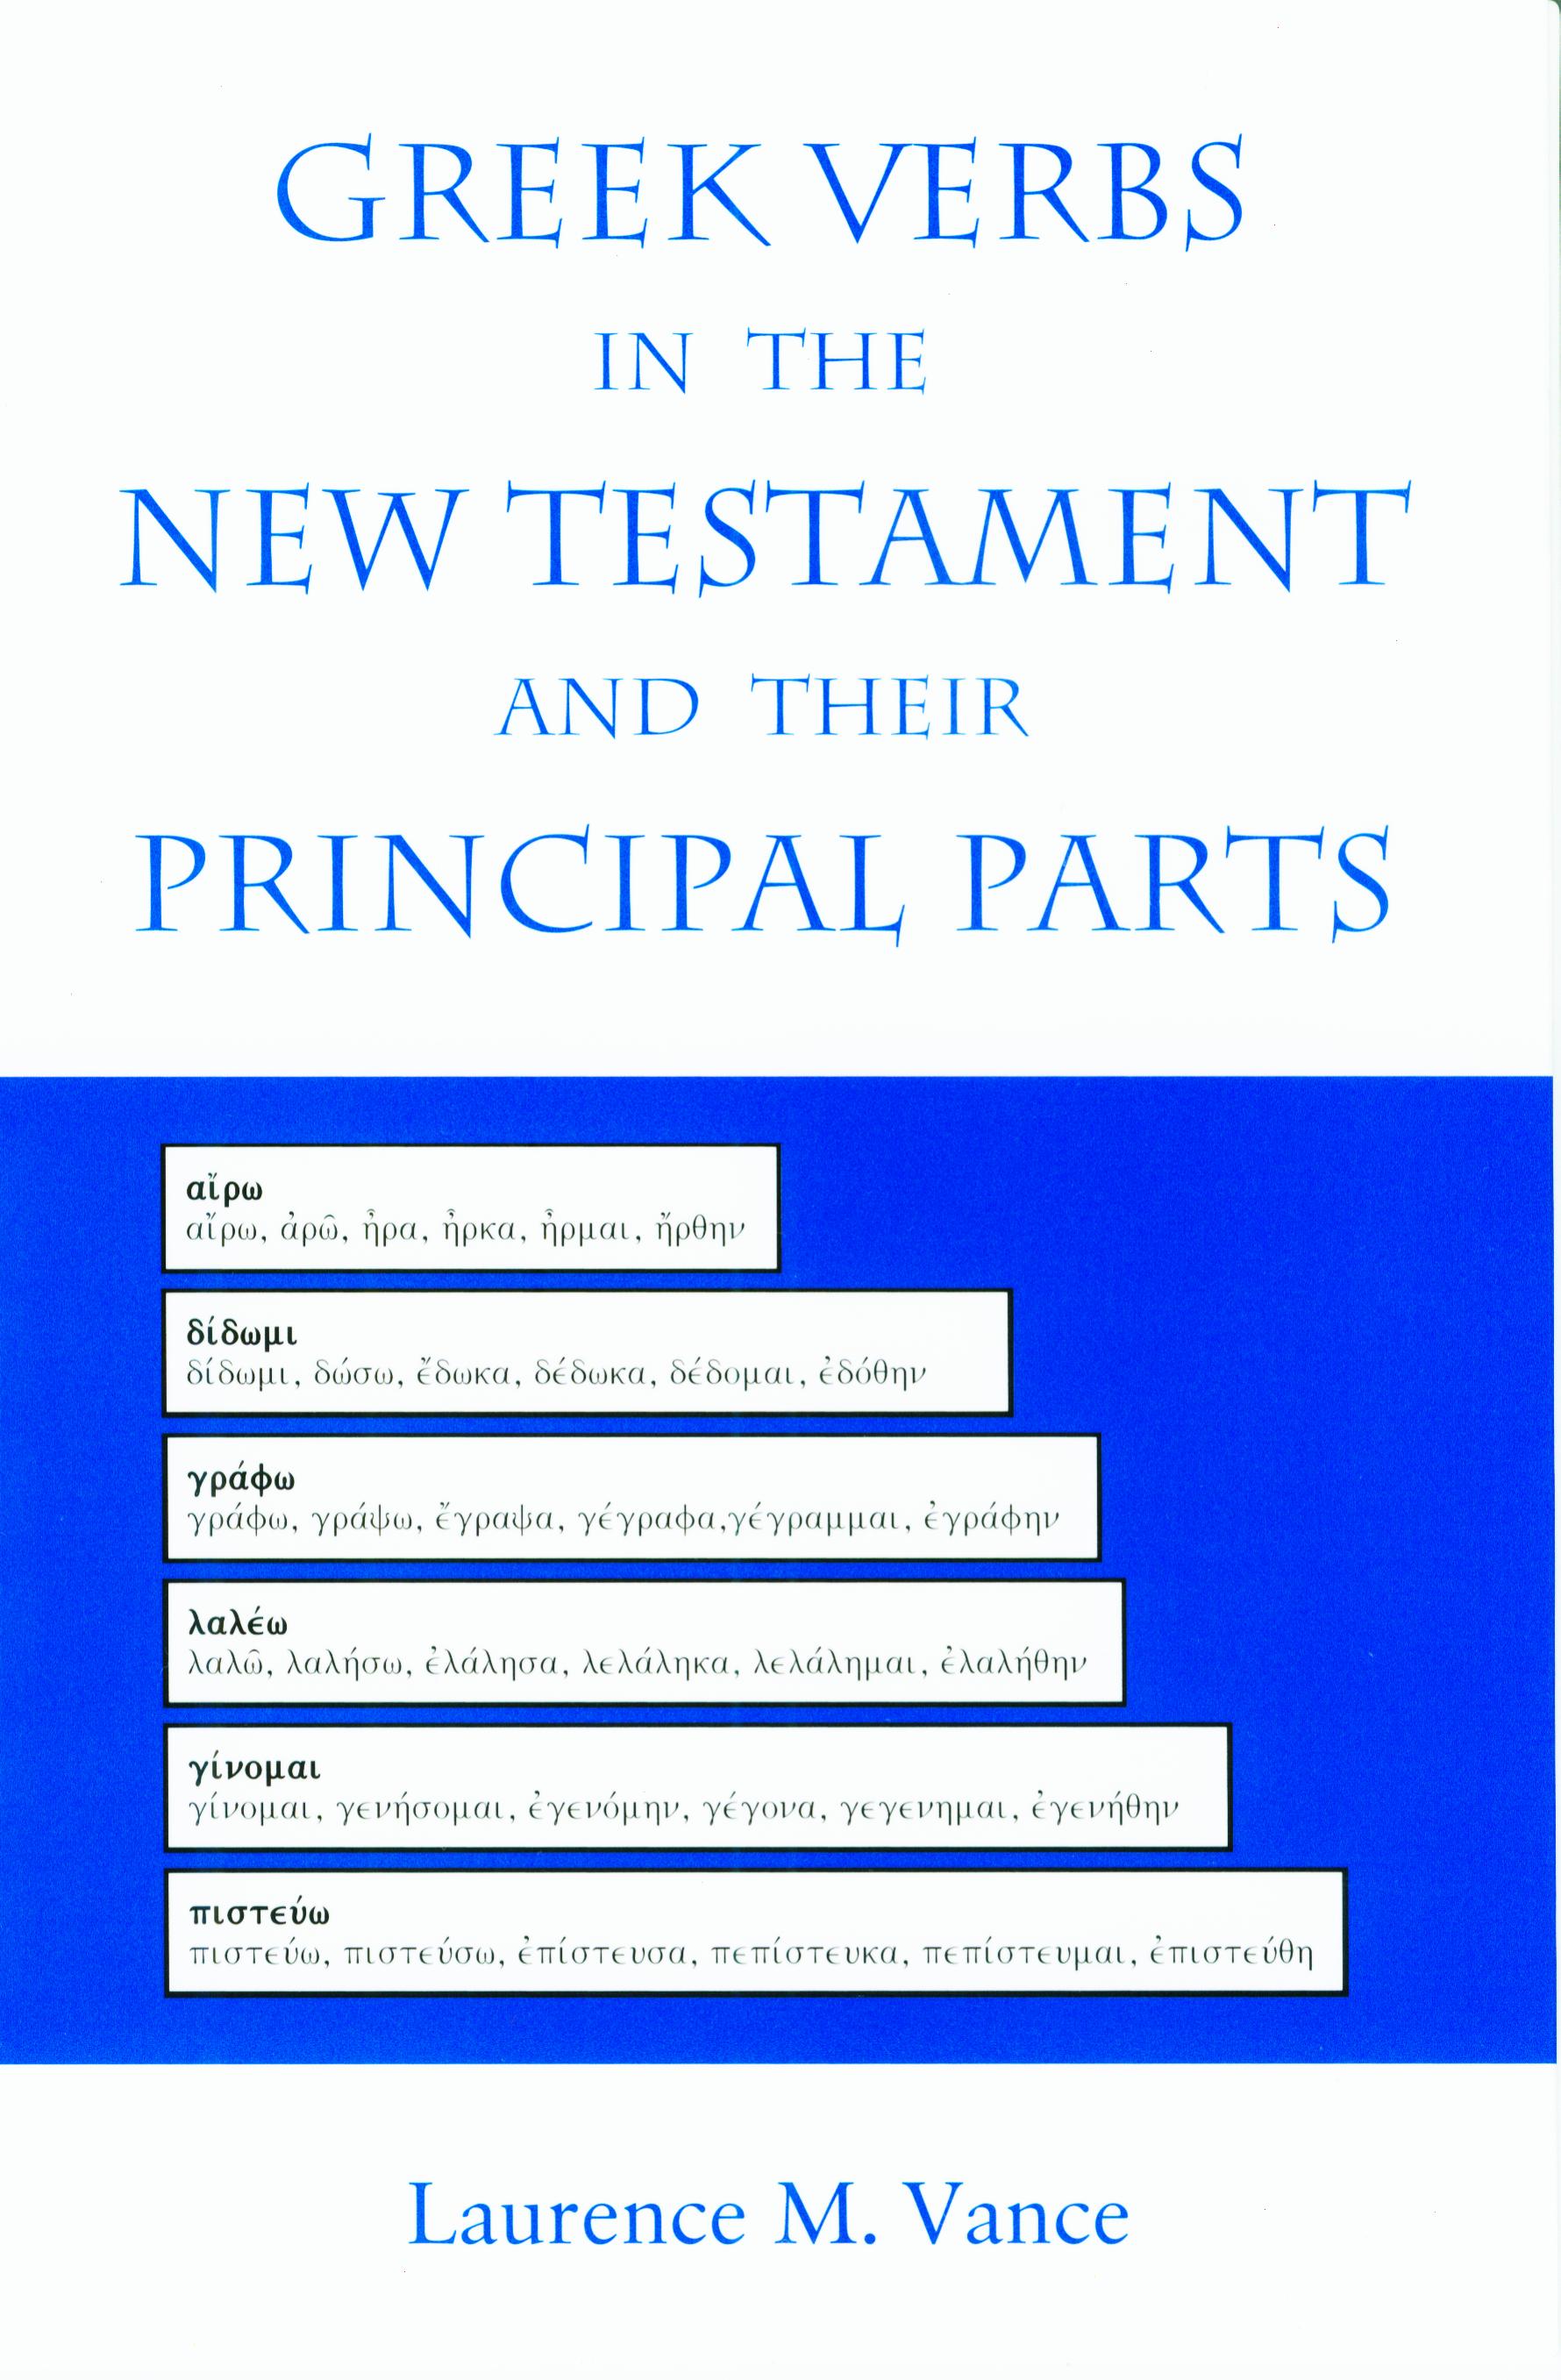 Greek Verbs in the New Testament and Their Principal Parts, 236 pages, lay-flat paperback, $9.95